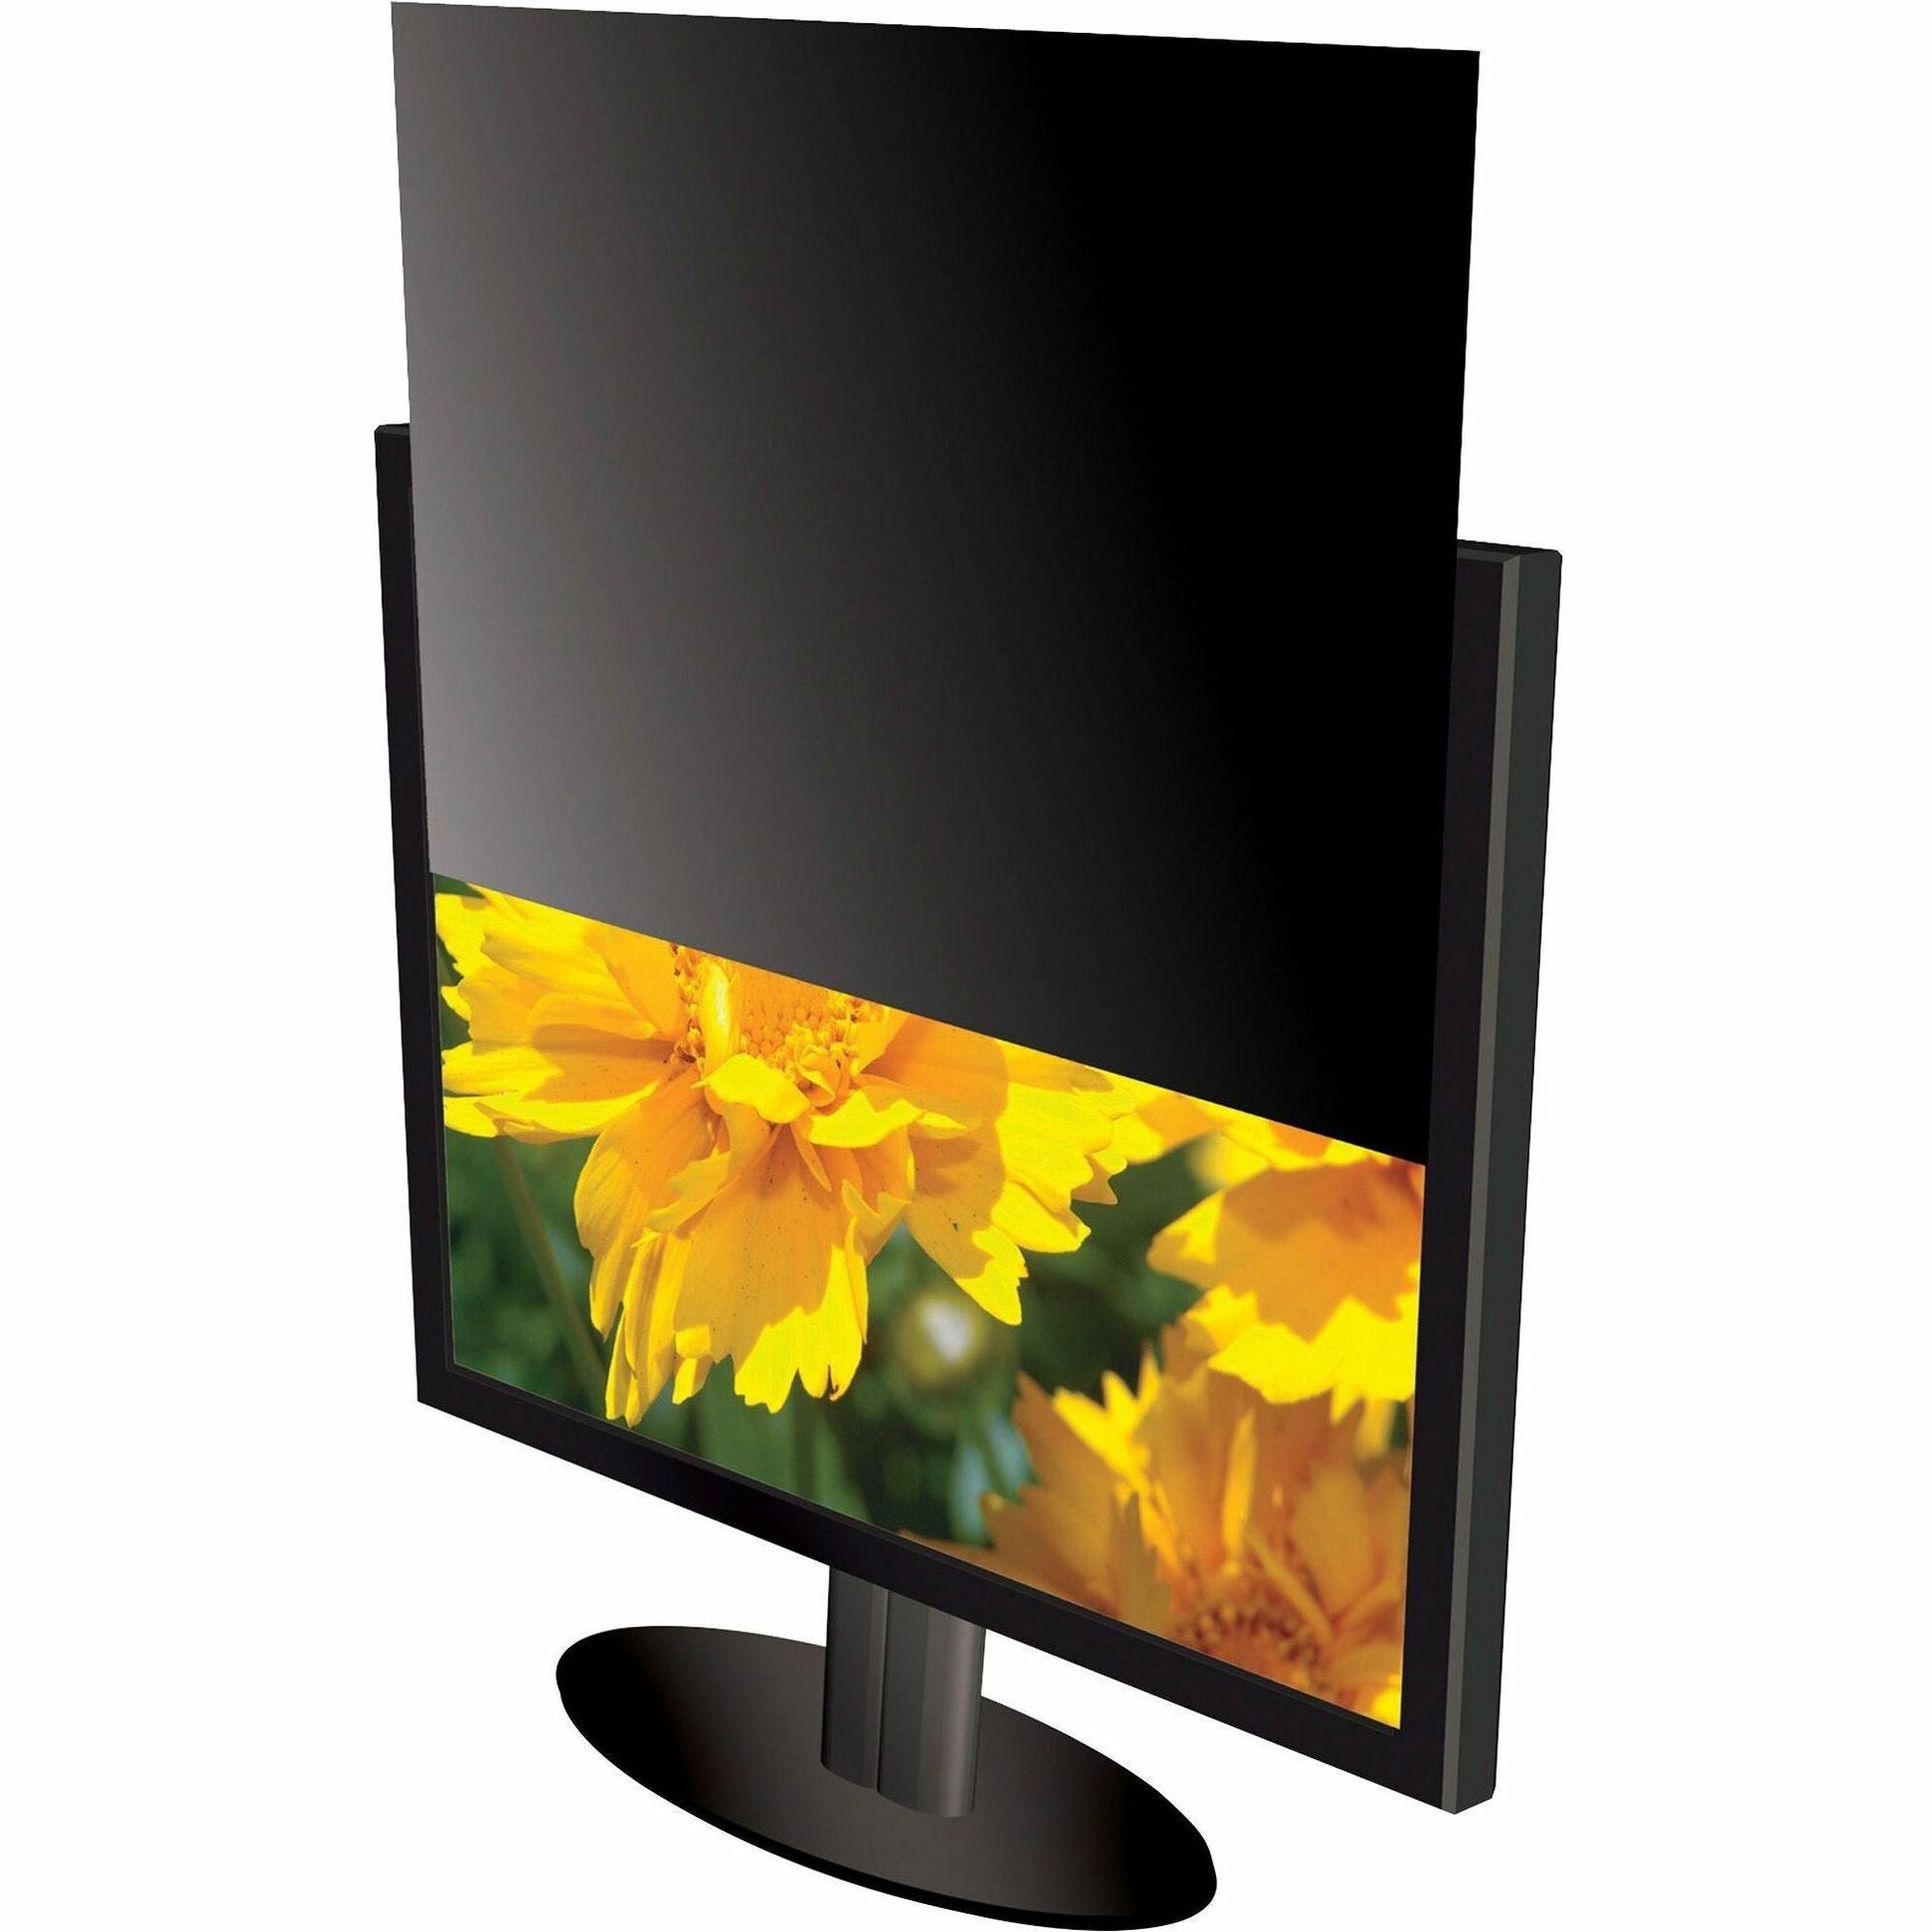 Kantek LCD Monitor Blackout Privacy Screens Black - For 18.5" Widescreen Monitor, Notebook - 16:9 - Anti-glare - 1 Pack - 